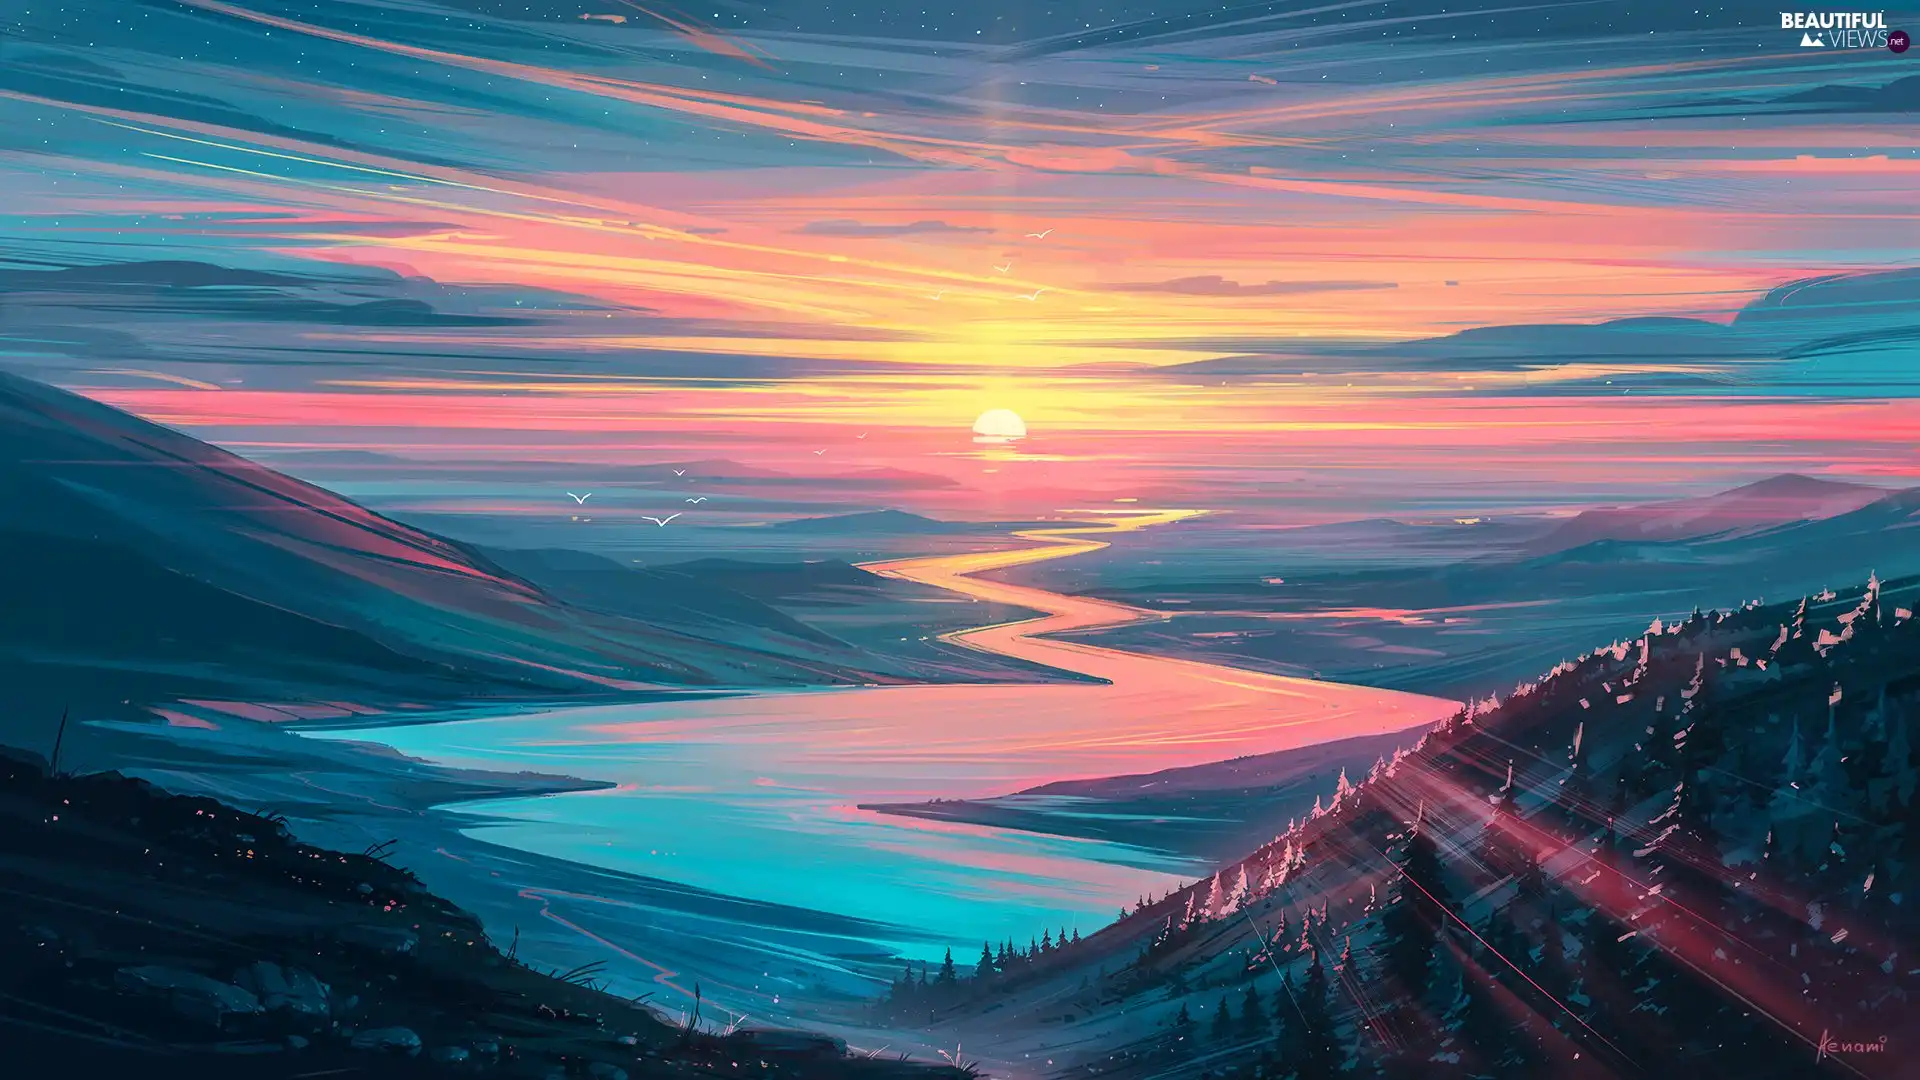 Mountains, graphics, winding, River, Sunrise